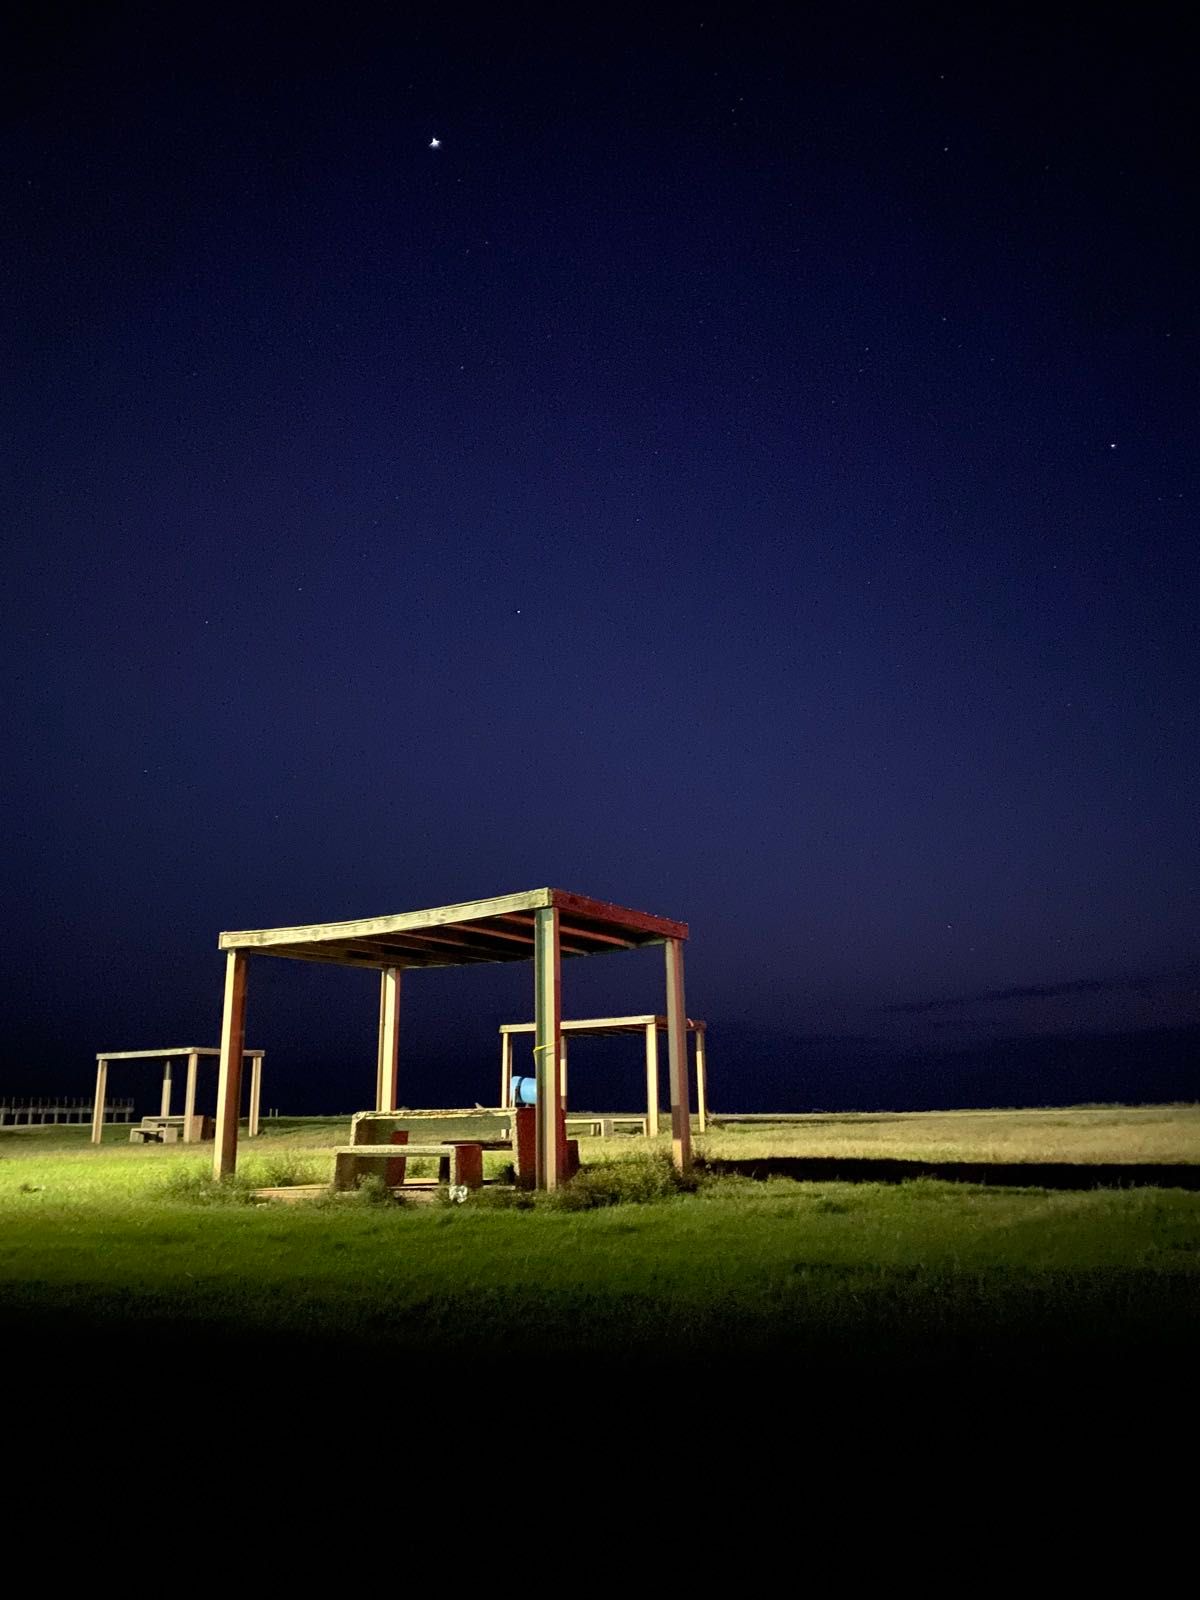 picnic stonehenge at night in sargent texas